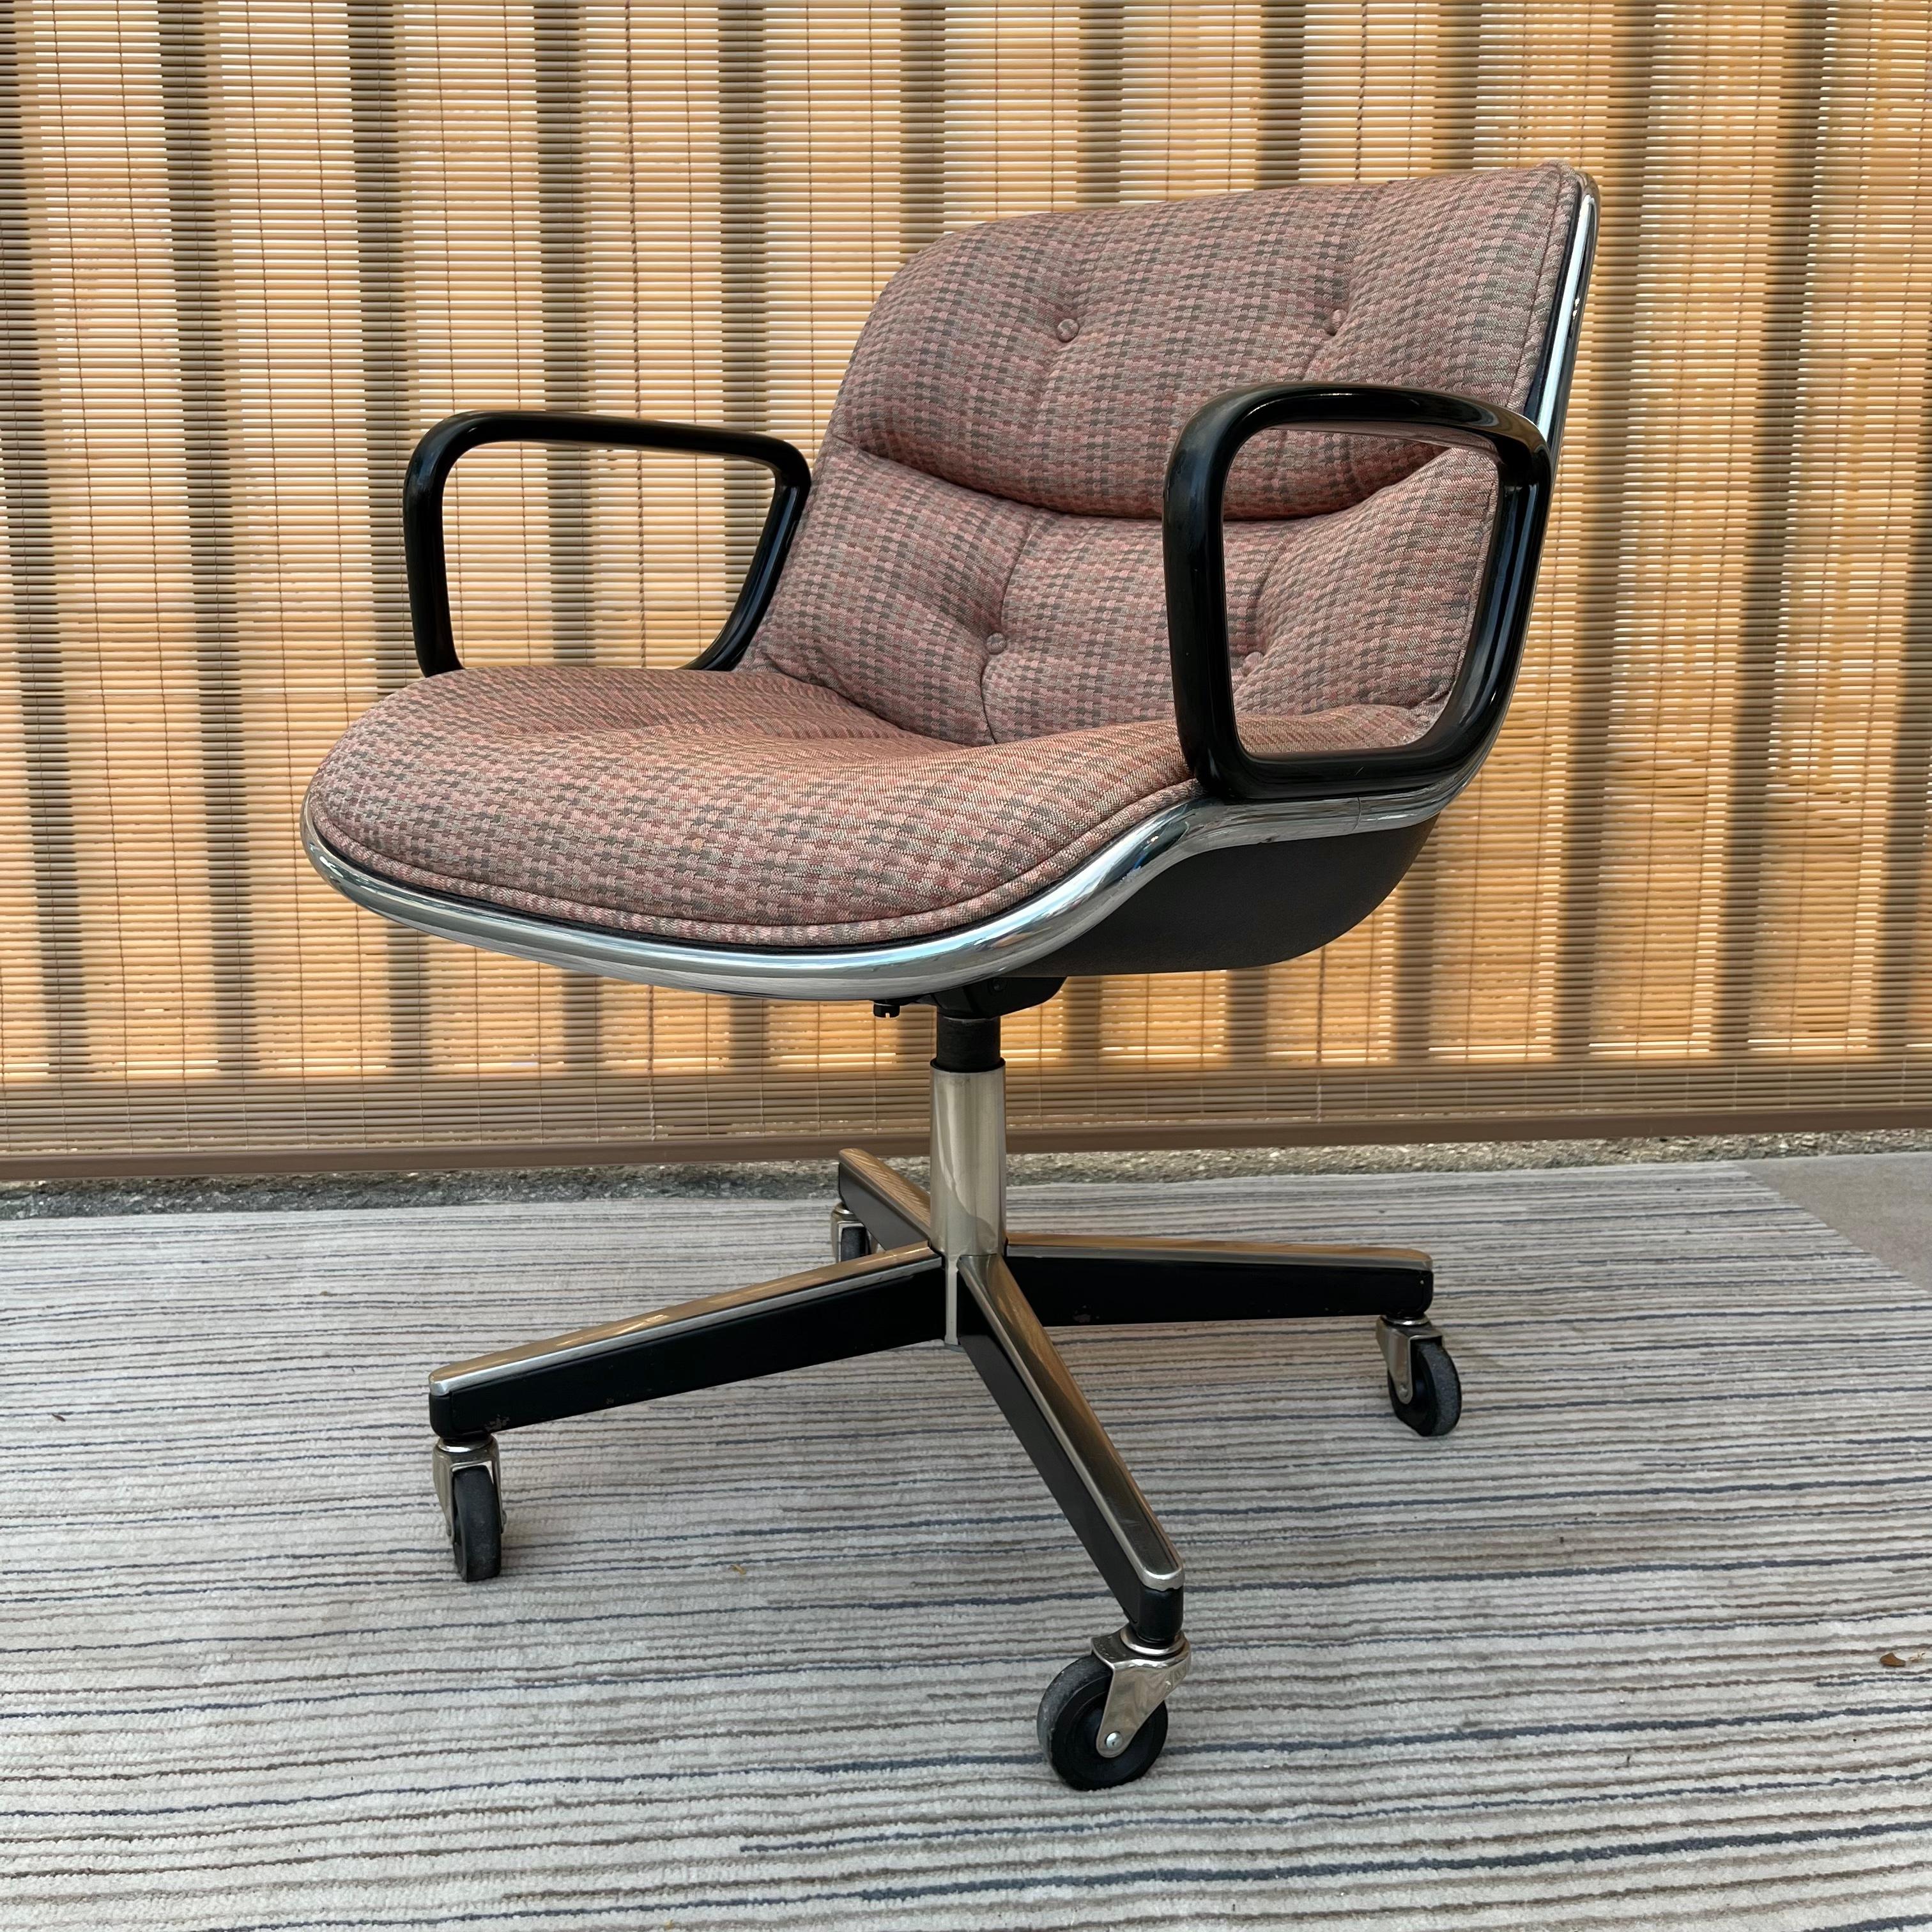 Vintage Mid-Century Modern Charles Pollock for Knoll Executive Chair. Manufactured in 1976 
Features a black frame and the original plaid textile upholstery.
The Pollock Executive Chair features what the designer described as 